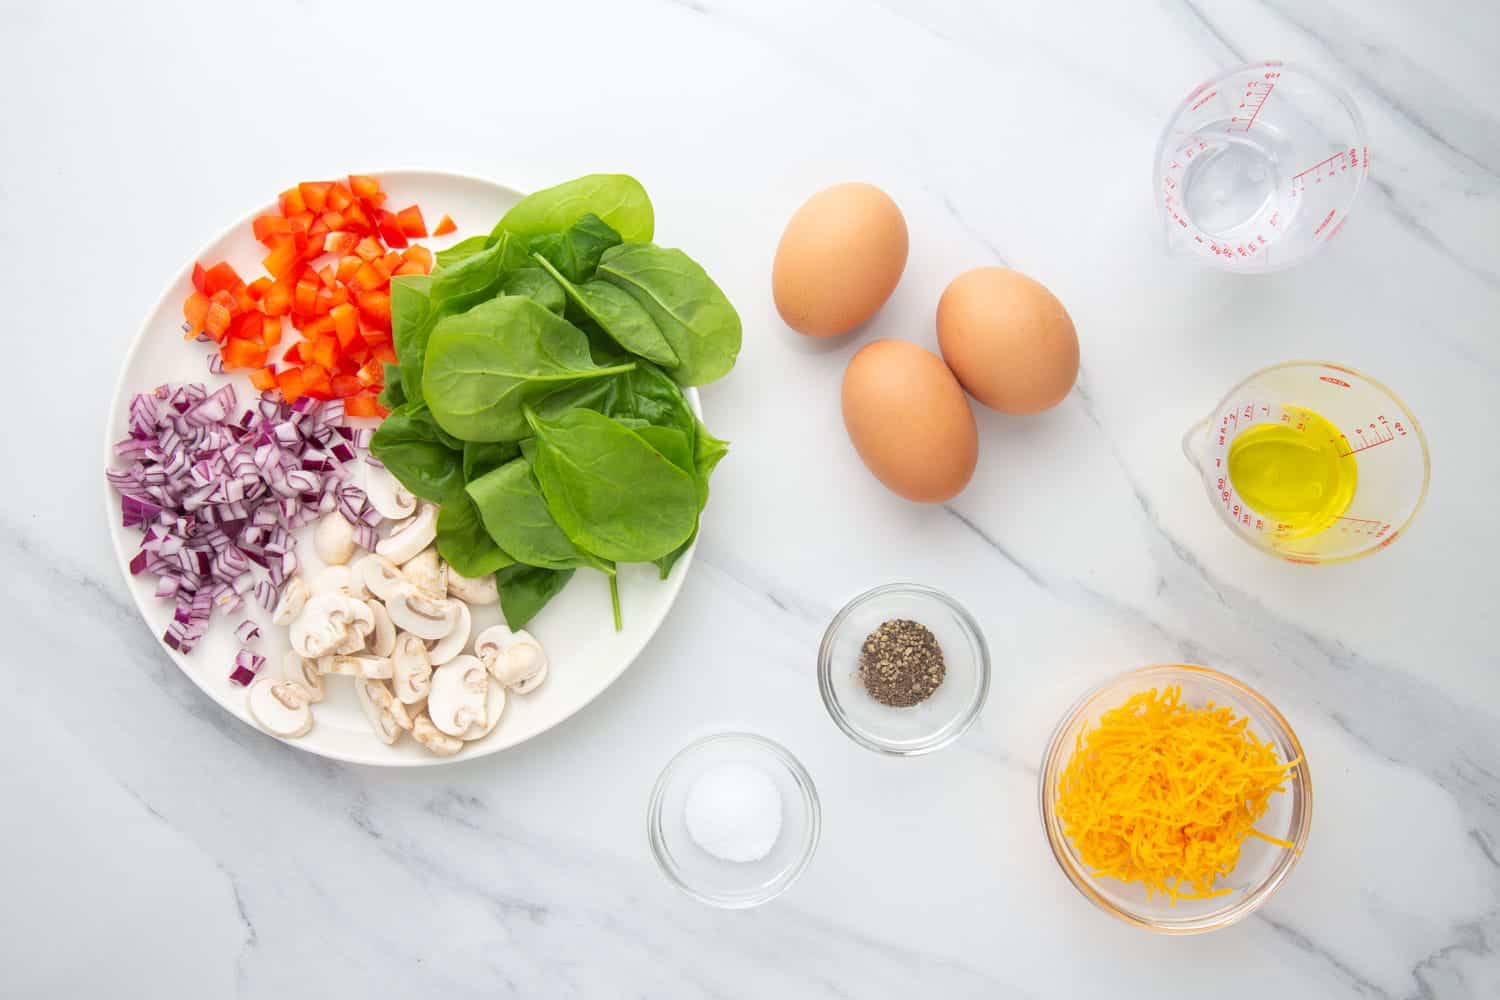 The simple ingredients needed to make a vegie omelet